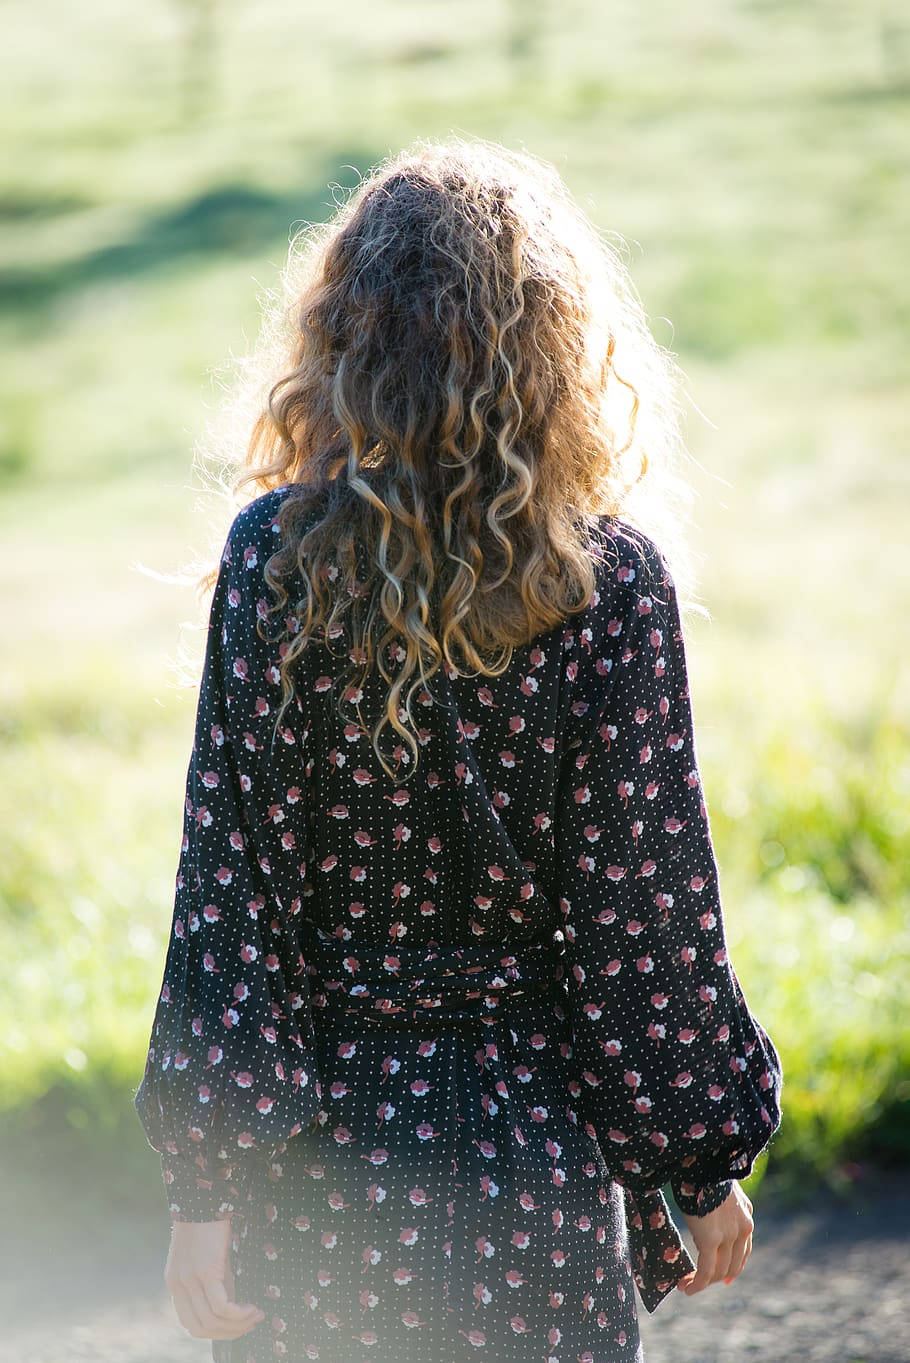 Back Of Woman With Curly Hair Wallpaper